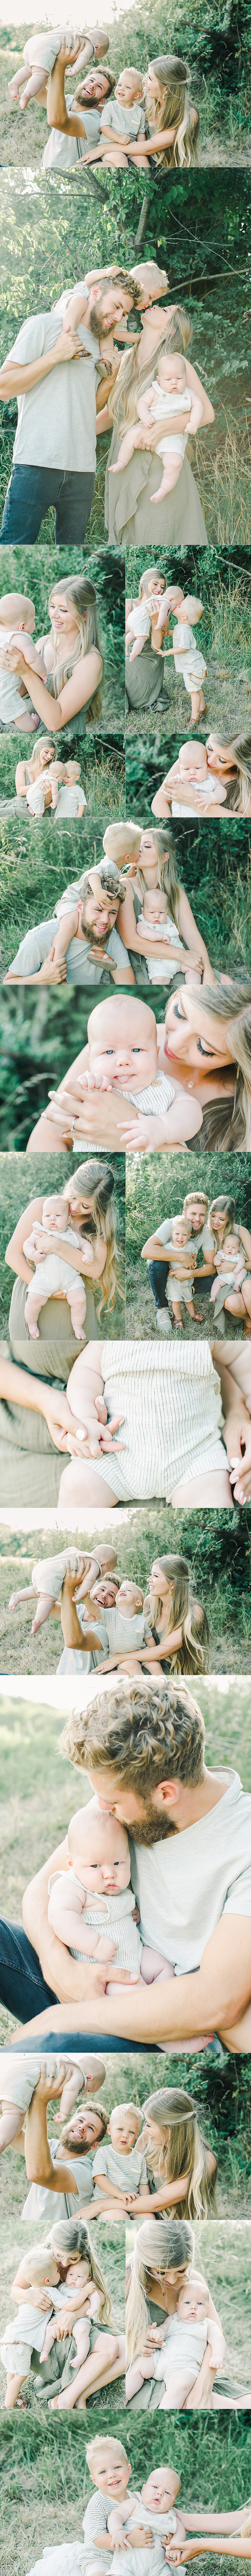 young family snuggles together in rolling hills in niagara